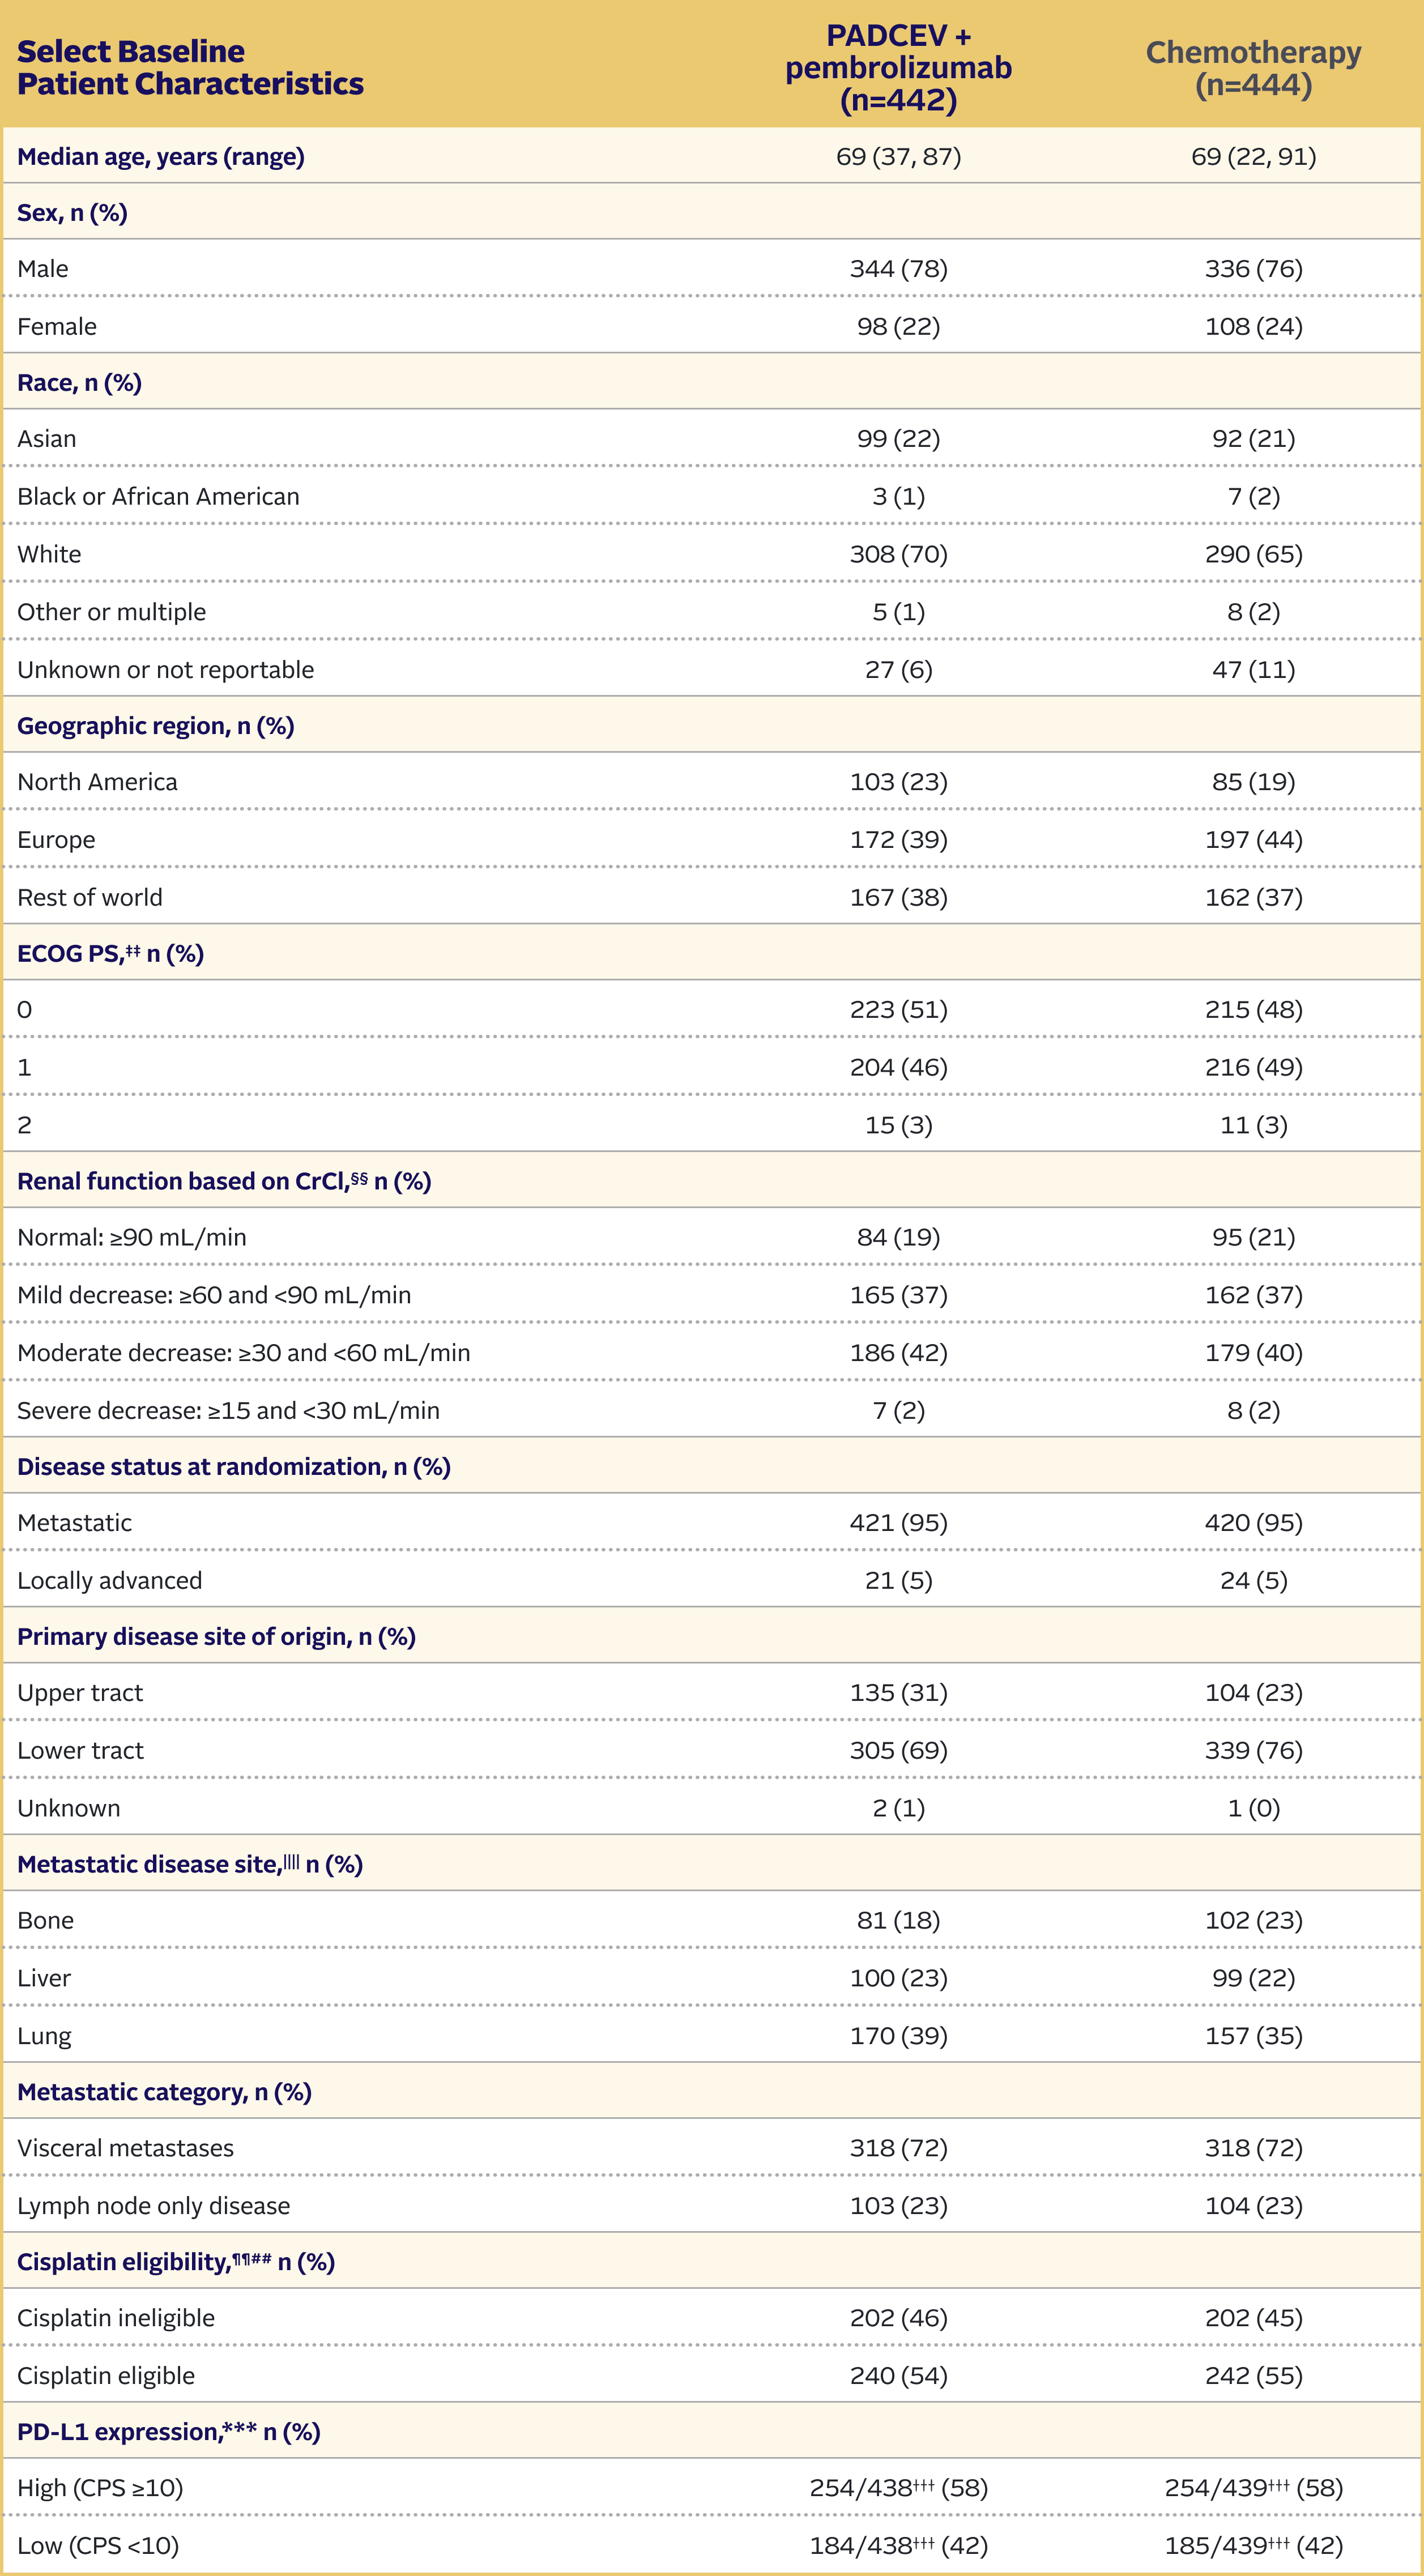 Table showing EV-302 trial baseline patient characteristics for PADCEV + pembrolizumab and chemotherapy.